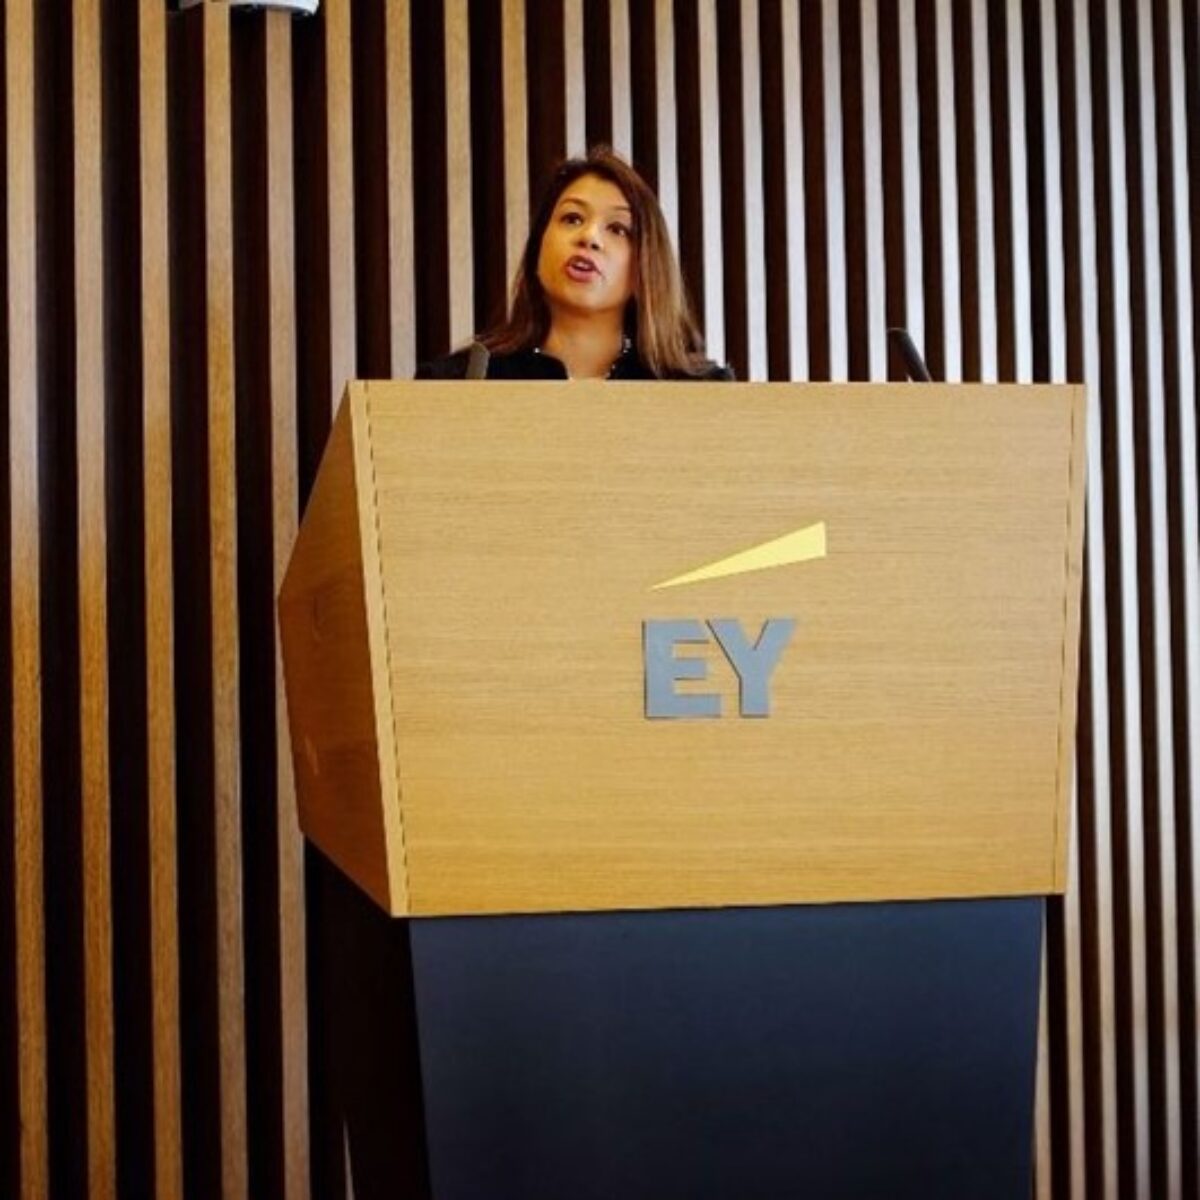 Tulip Siddiq delivering a speech at an EY podium